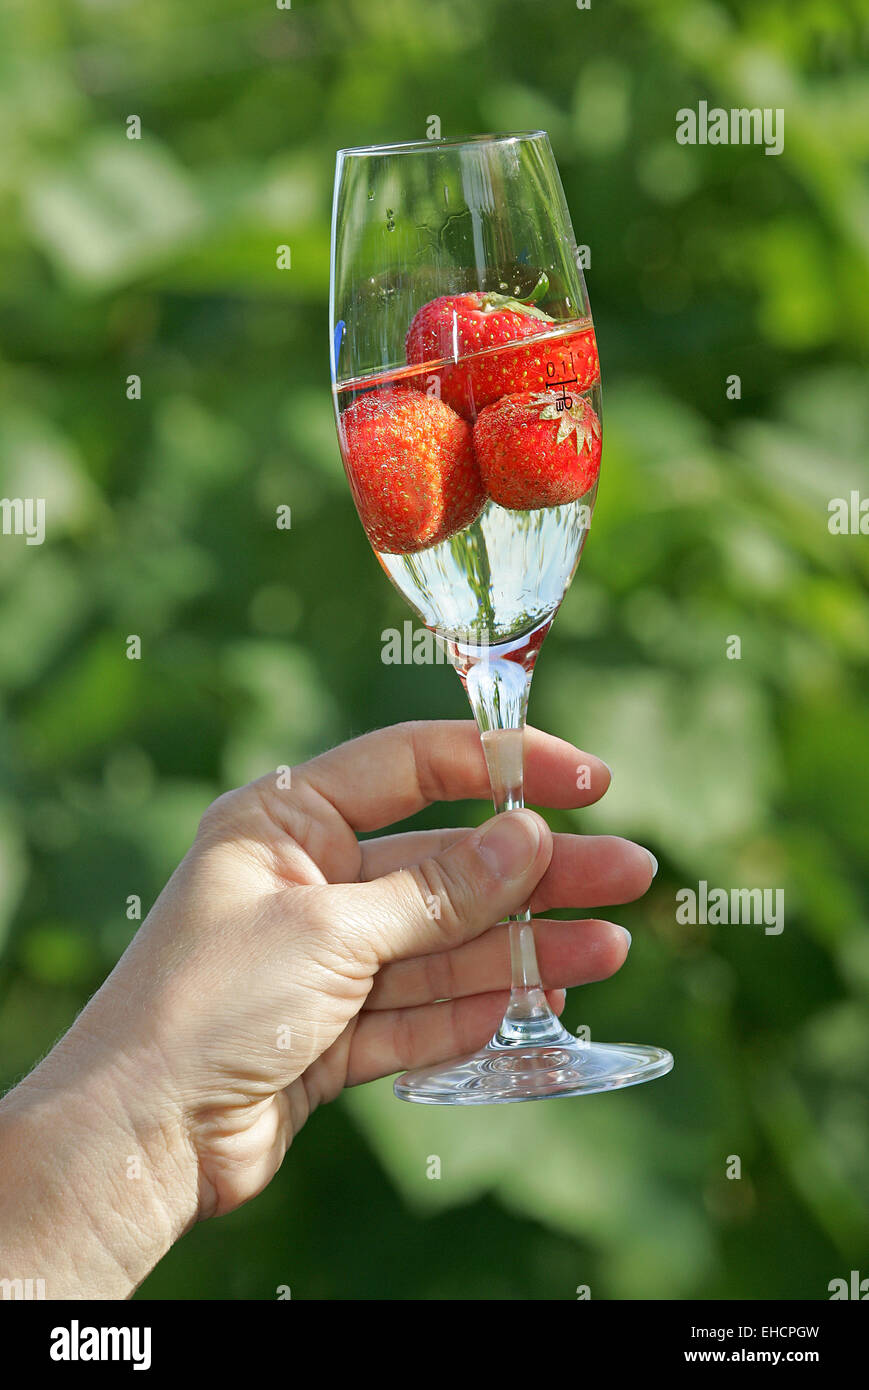 Strawberries in the glass Stock Photo